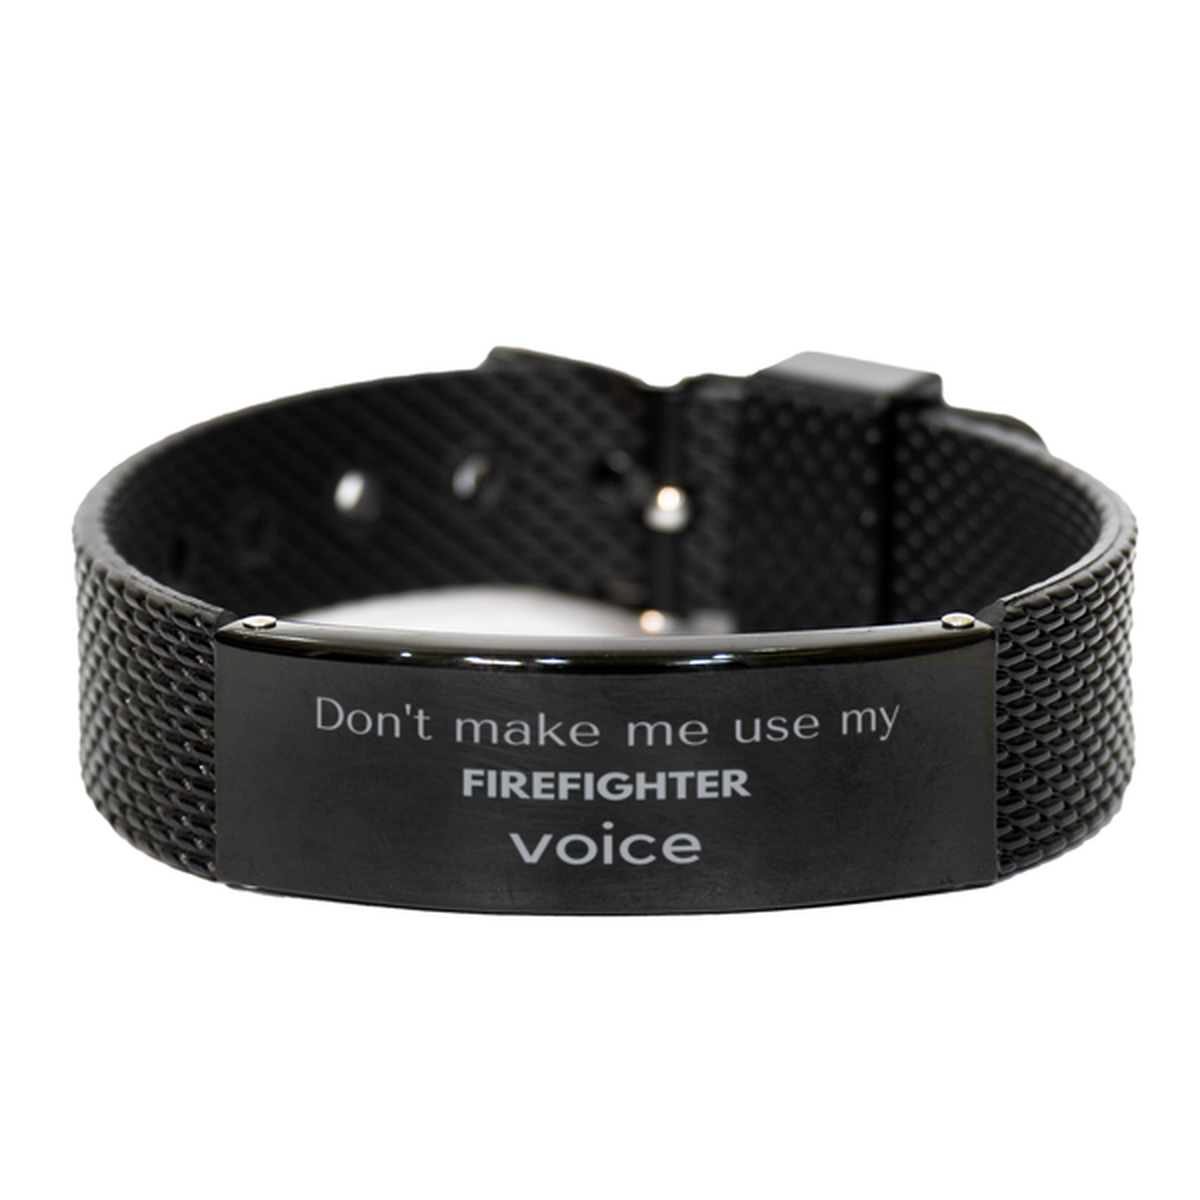 Don't make me use my Firefighter voice, Sarcasm Firefighter Gifts, Christmas Firefighter Black Shark Mesh Bracelet Birthday Unique Gifts For Firefighter Coworkers, Men, Women, Colleague, Friends